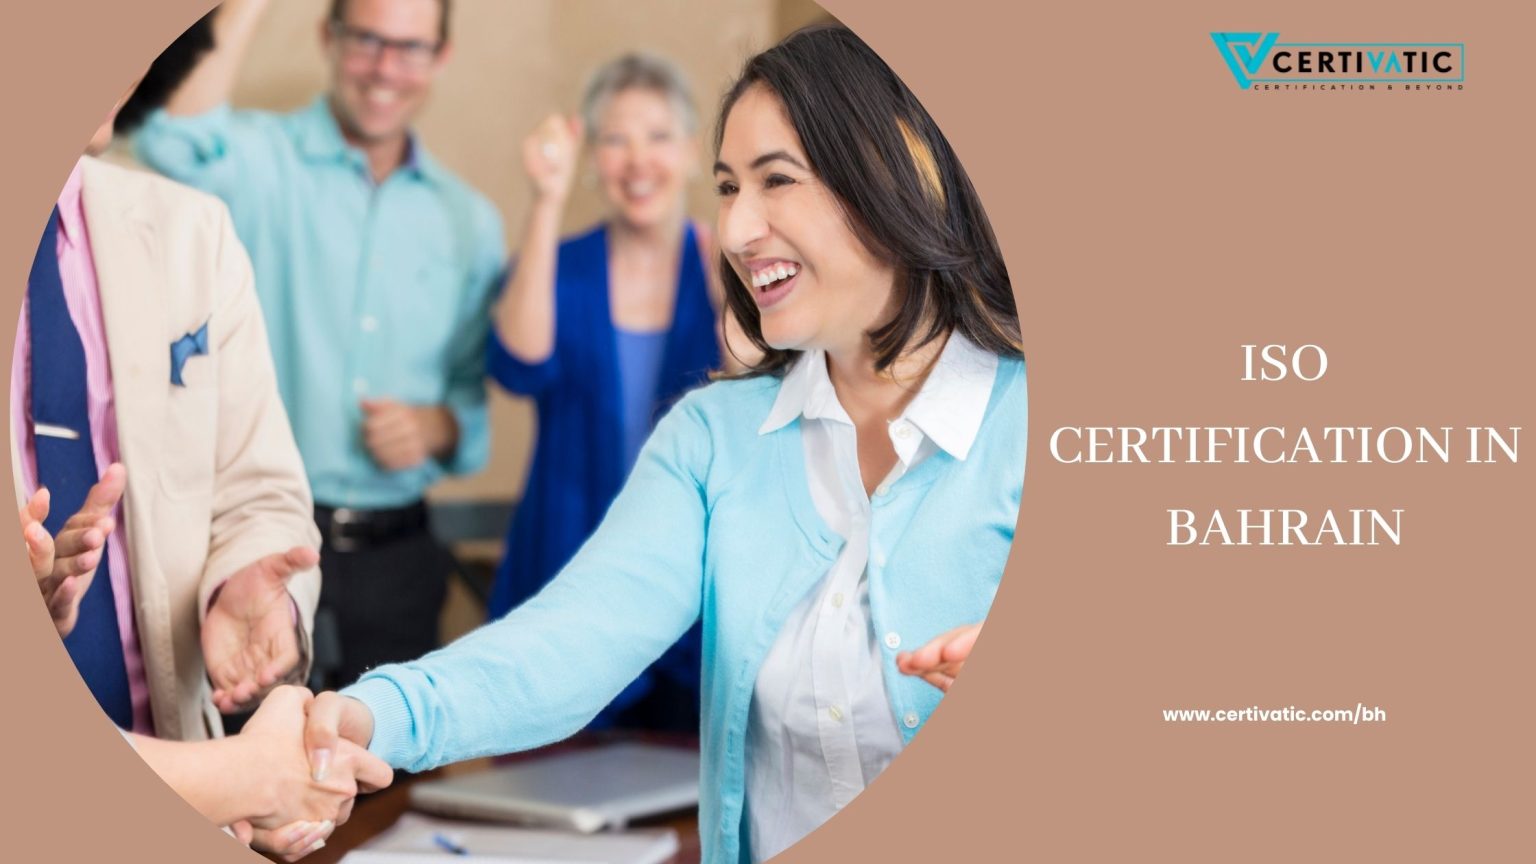 How does ISO Certification in Bahrain benefit to my business?